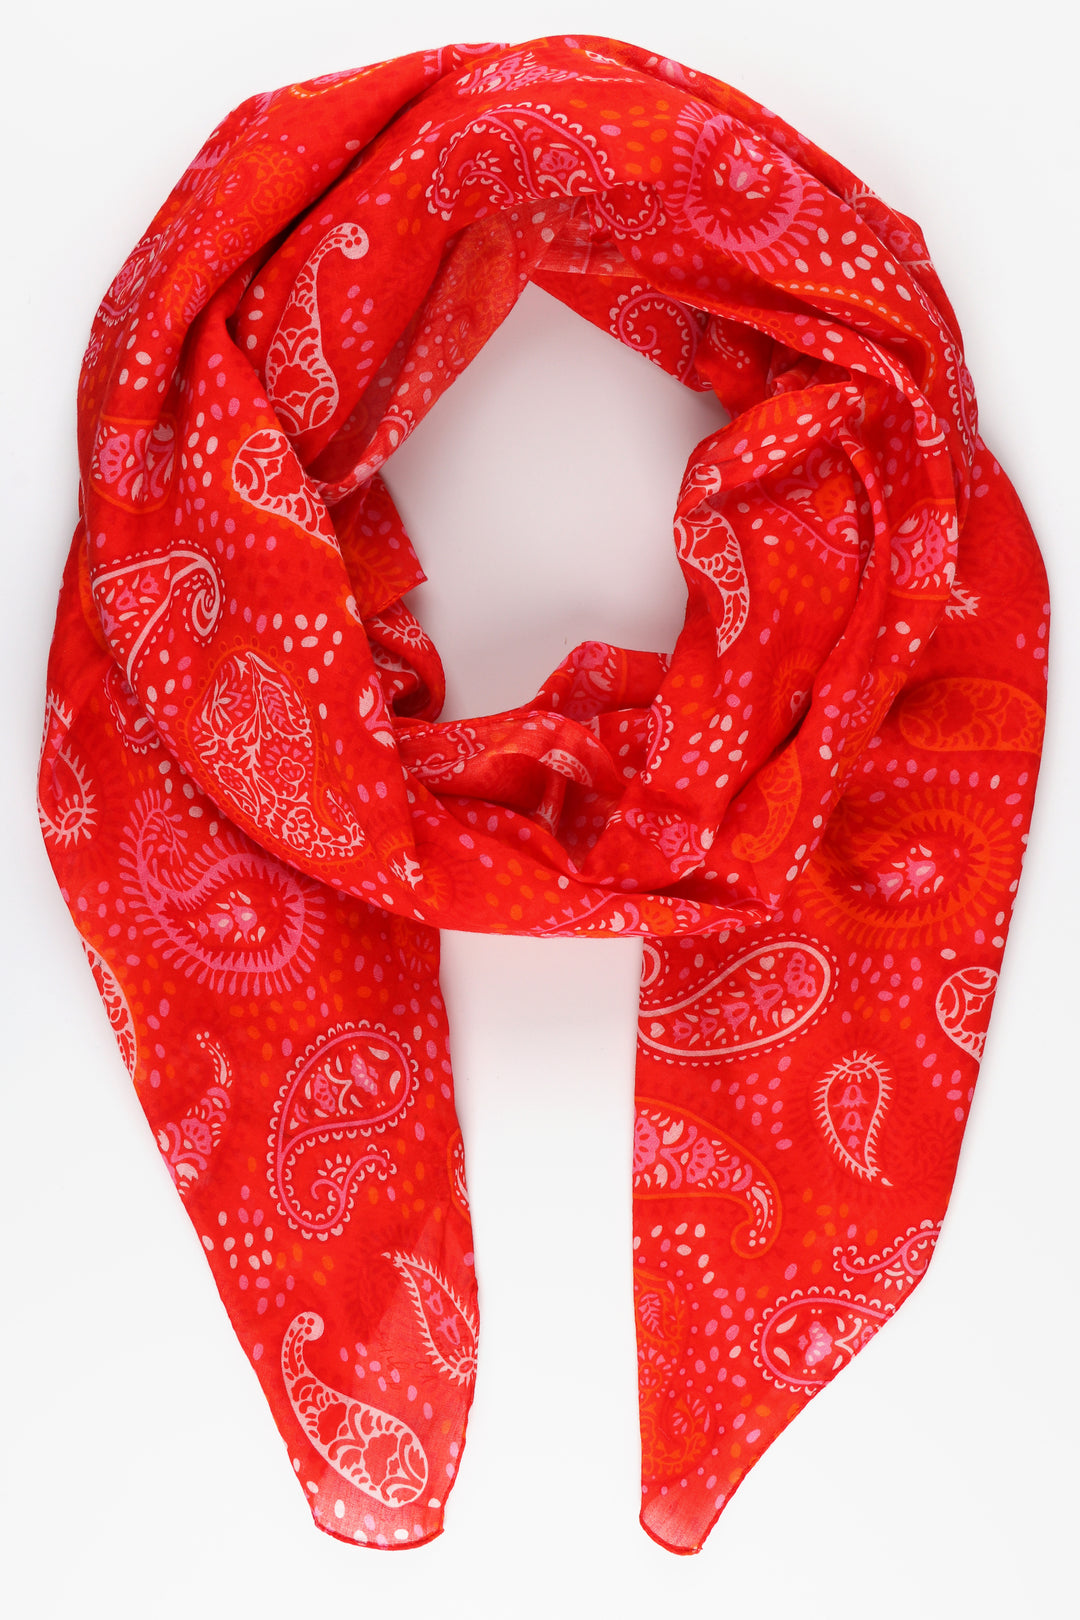 red scarf with an all over white  paisley print pattern